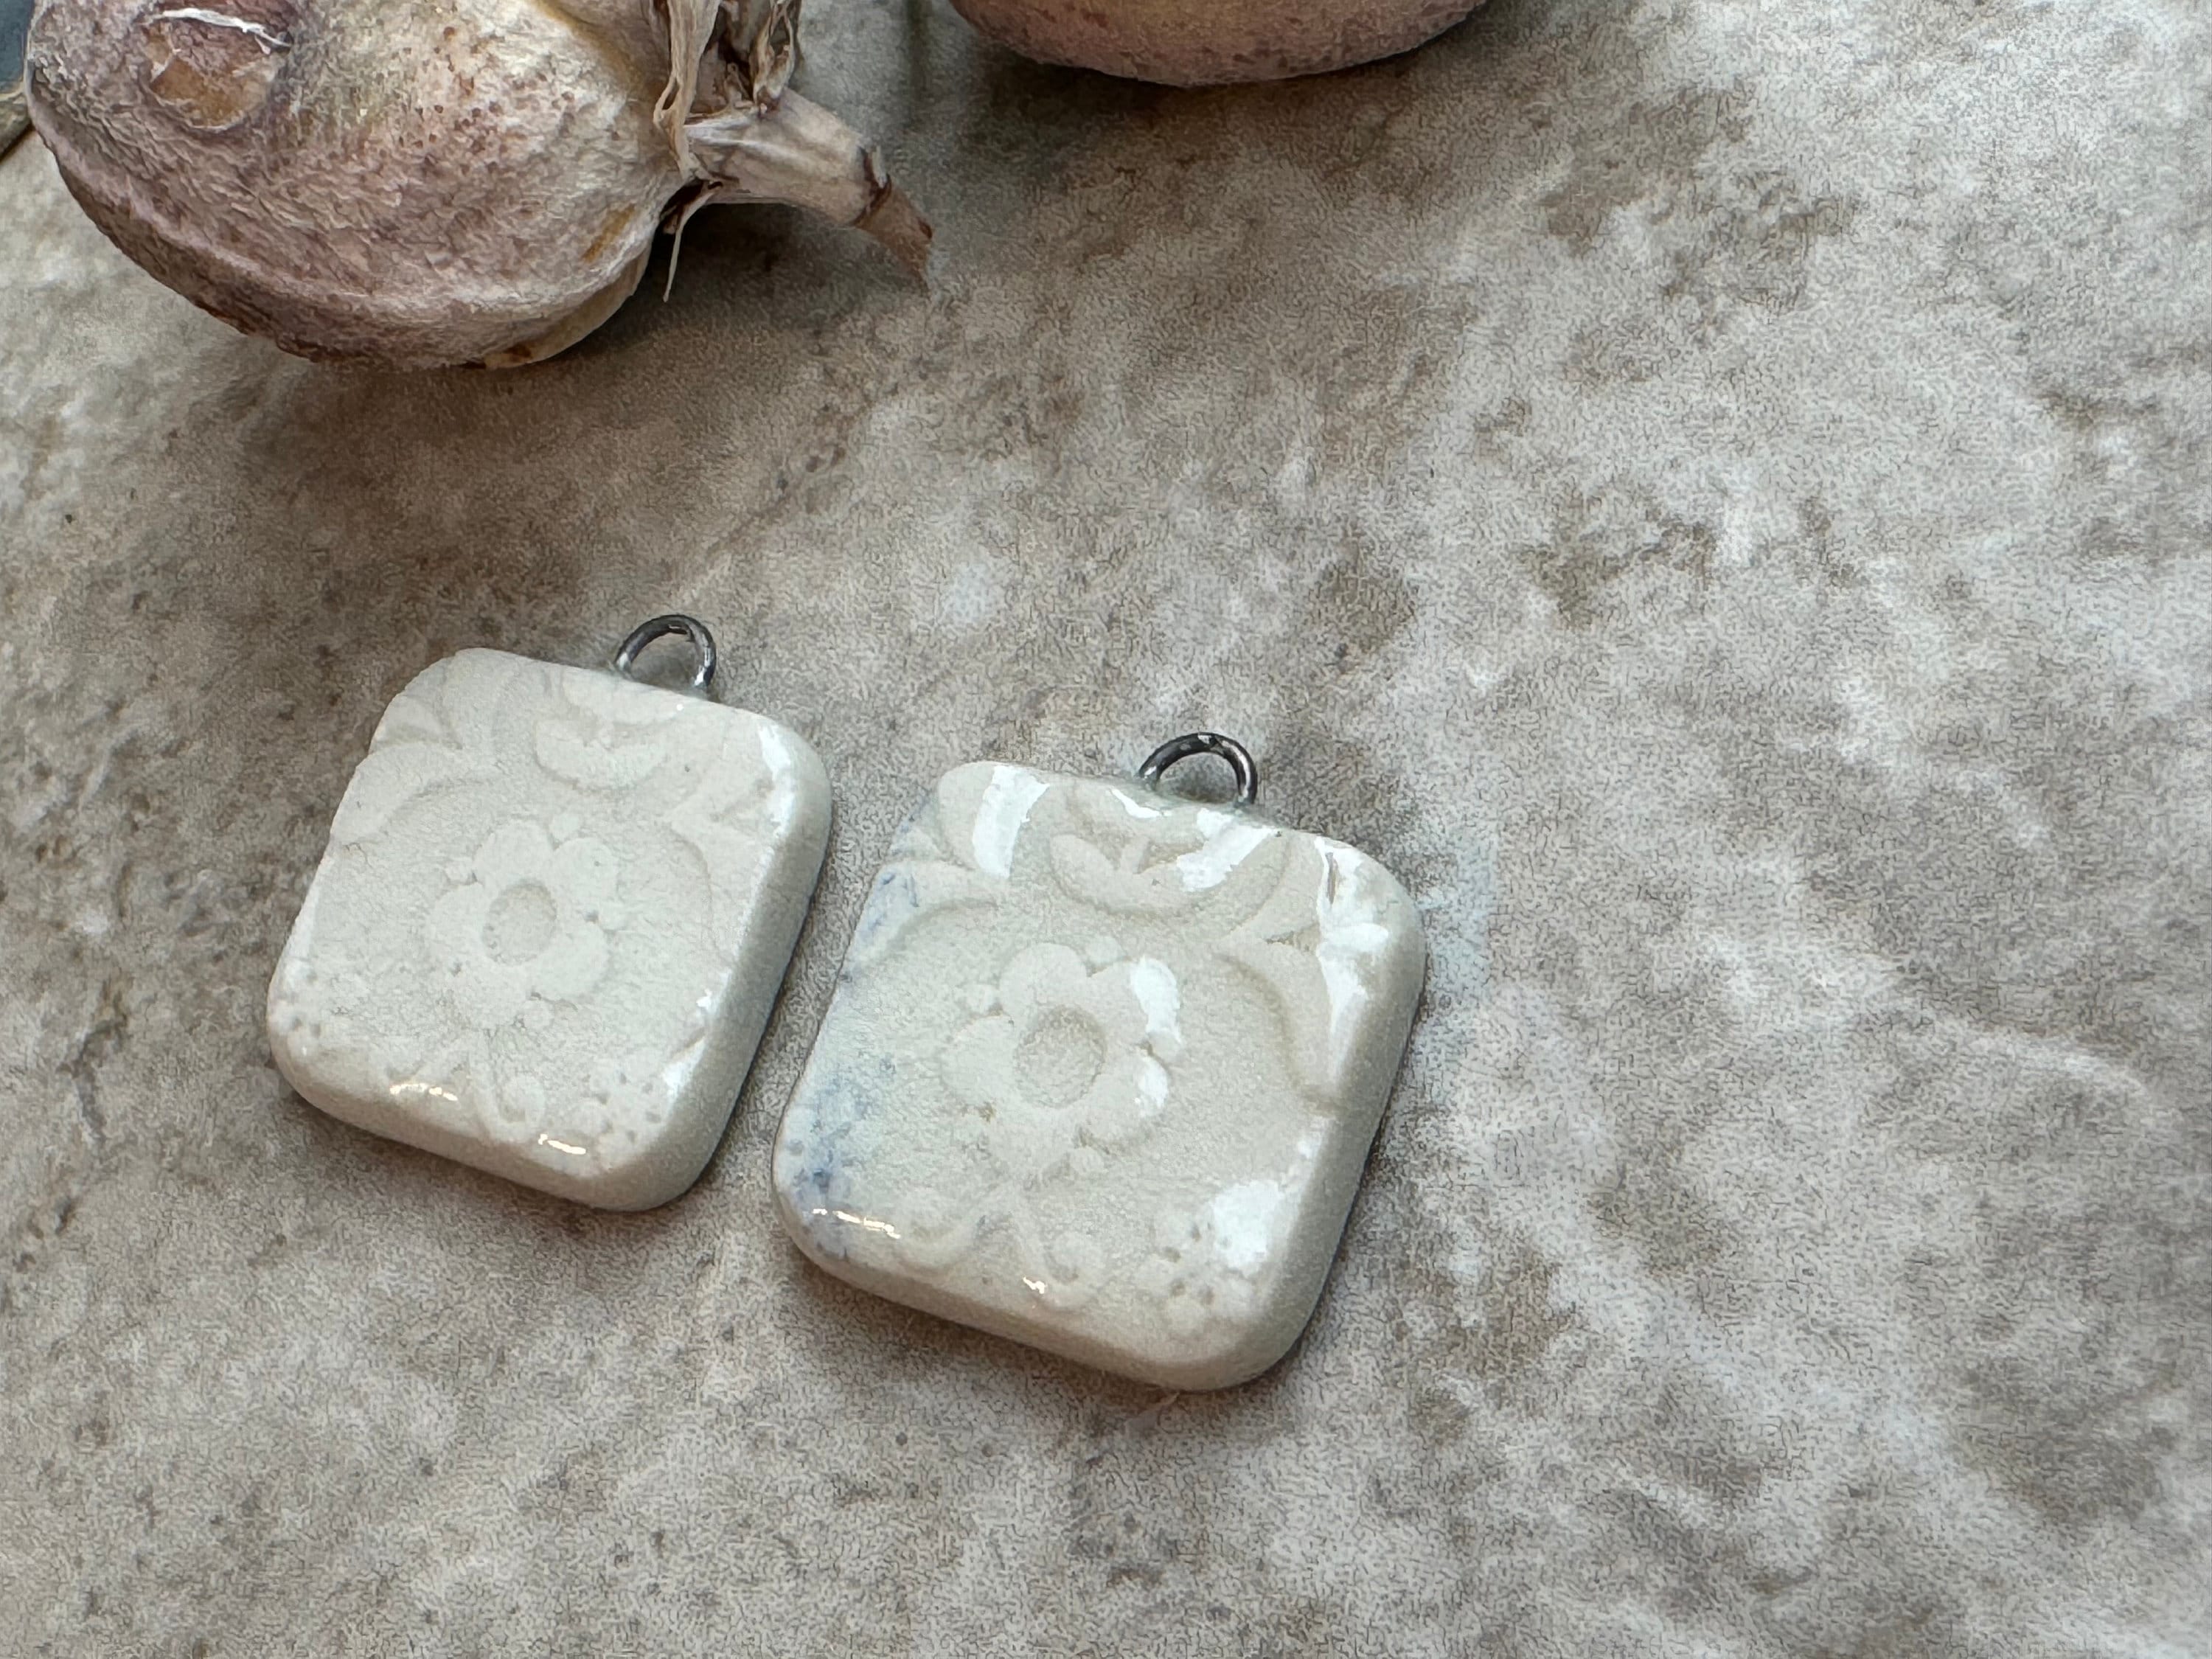 White Earring Bead Pair, Square Folk Pattern, Porcelain Ceramic Charms, Jewelry Making Components, Beading Handmade